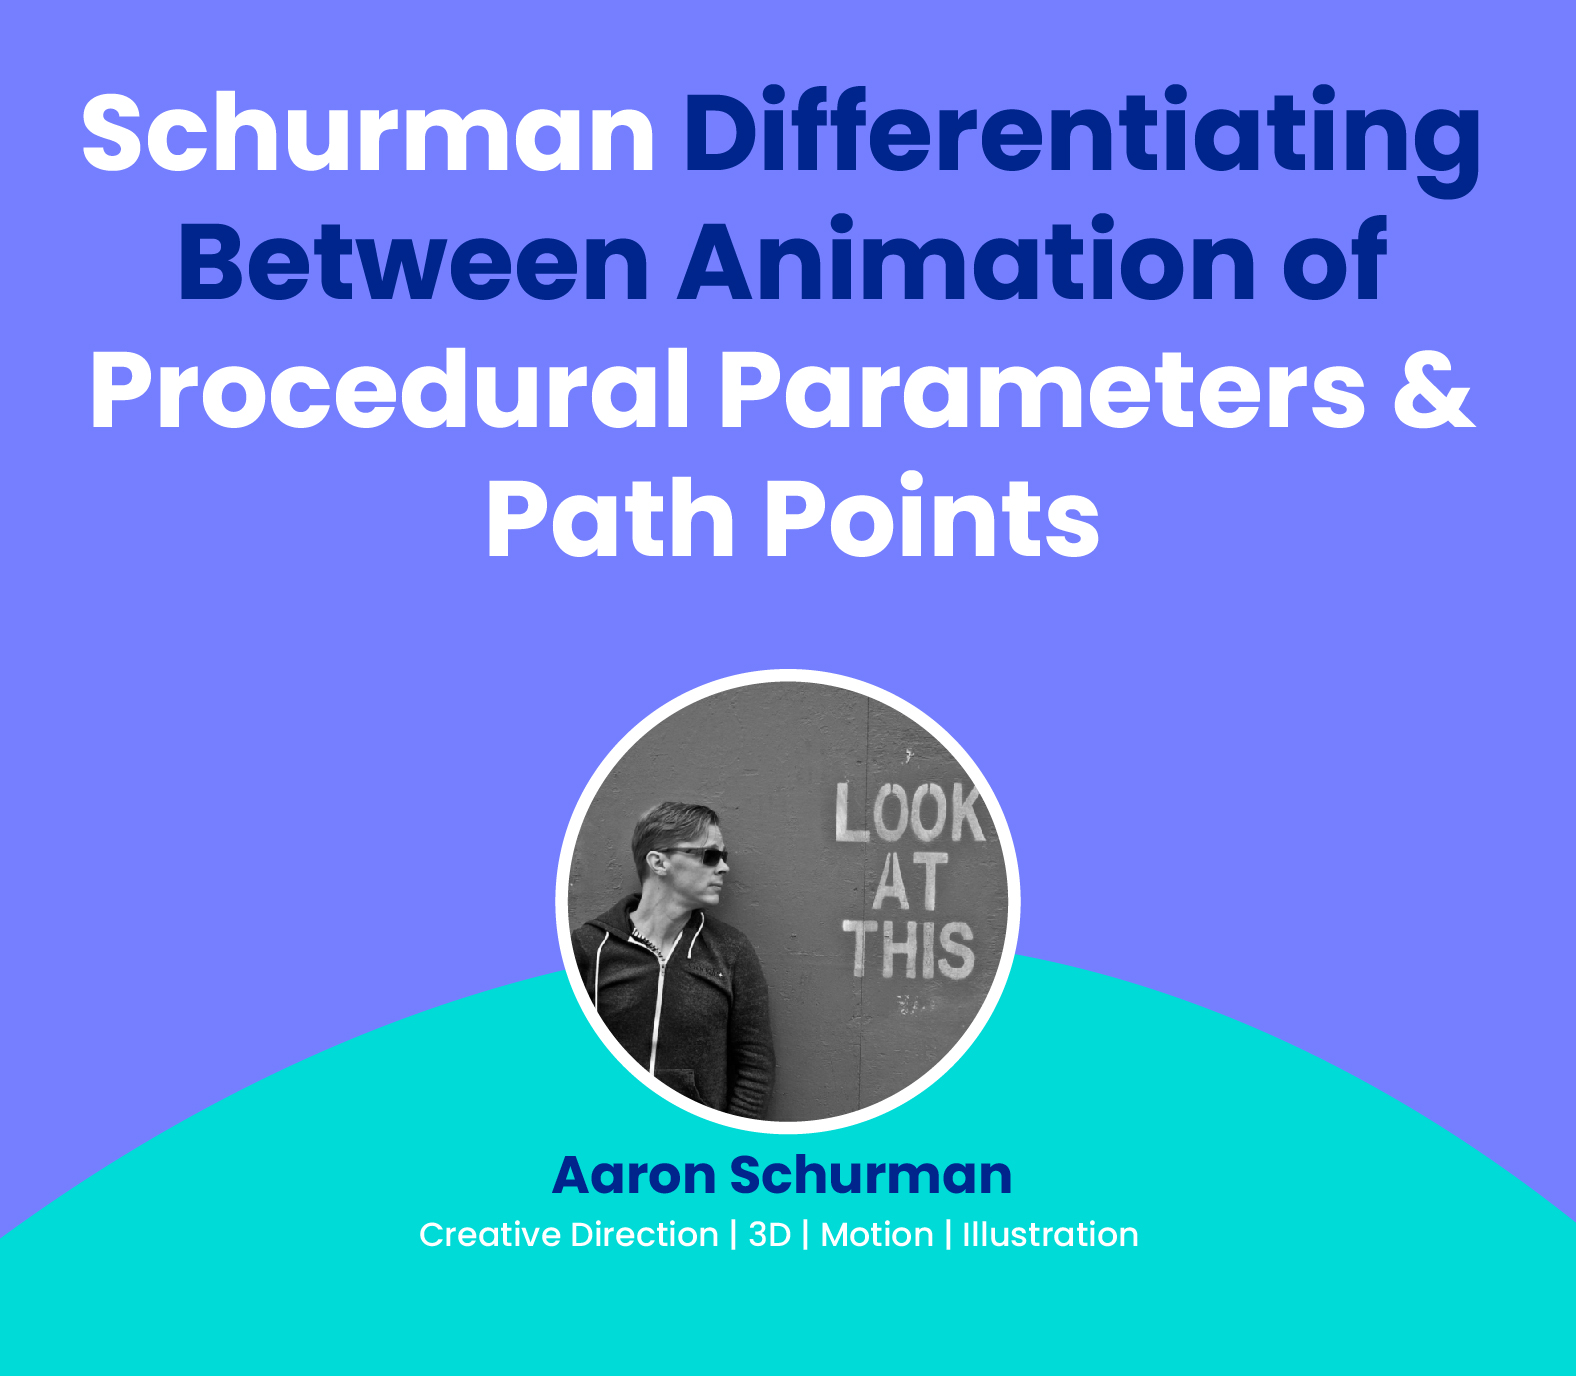 Schurman Differentiating Between Animation of Procedural Parameters & Path Points